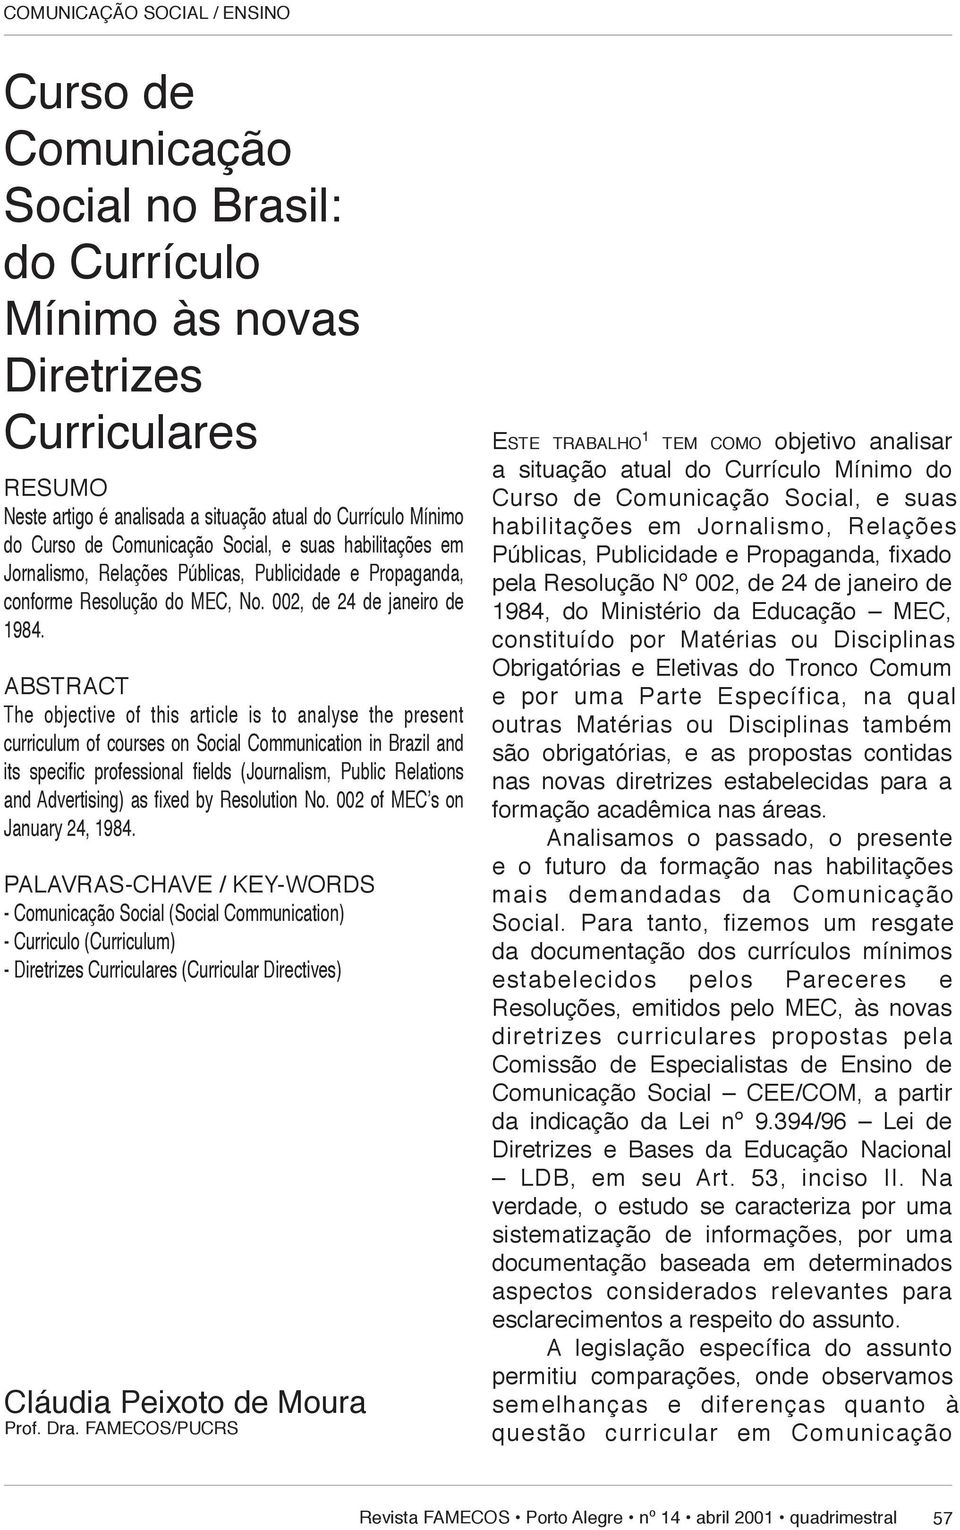 ABSTRACT The objective of this article is to analyse the present curriculum of courses on So ci al Communication in Brazil and its specifi c professional fi elds (Journalism, Public Relations and